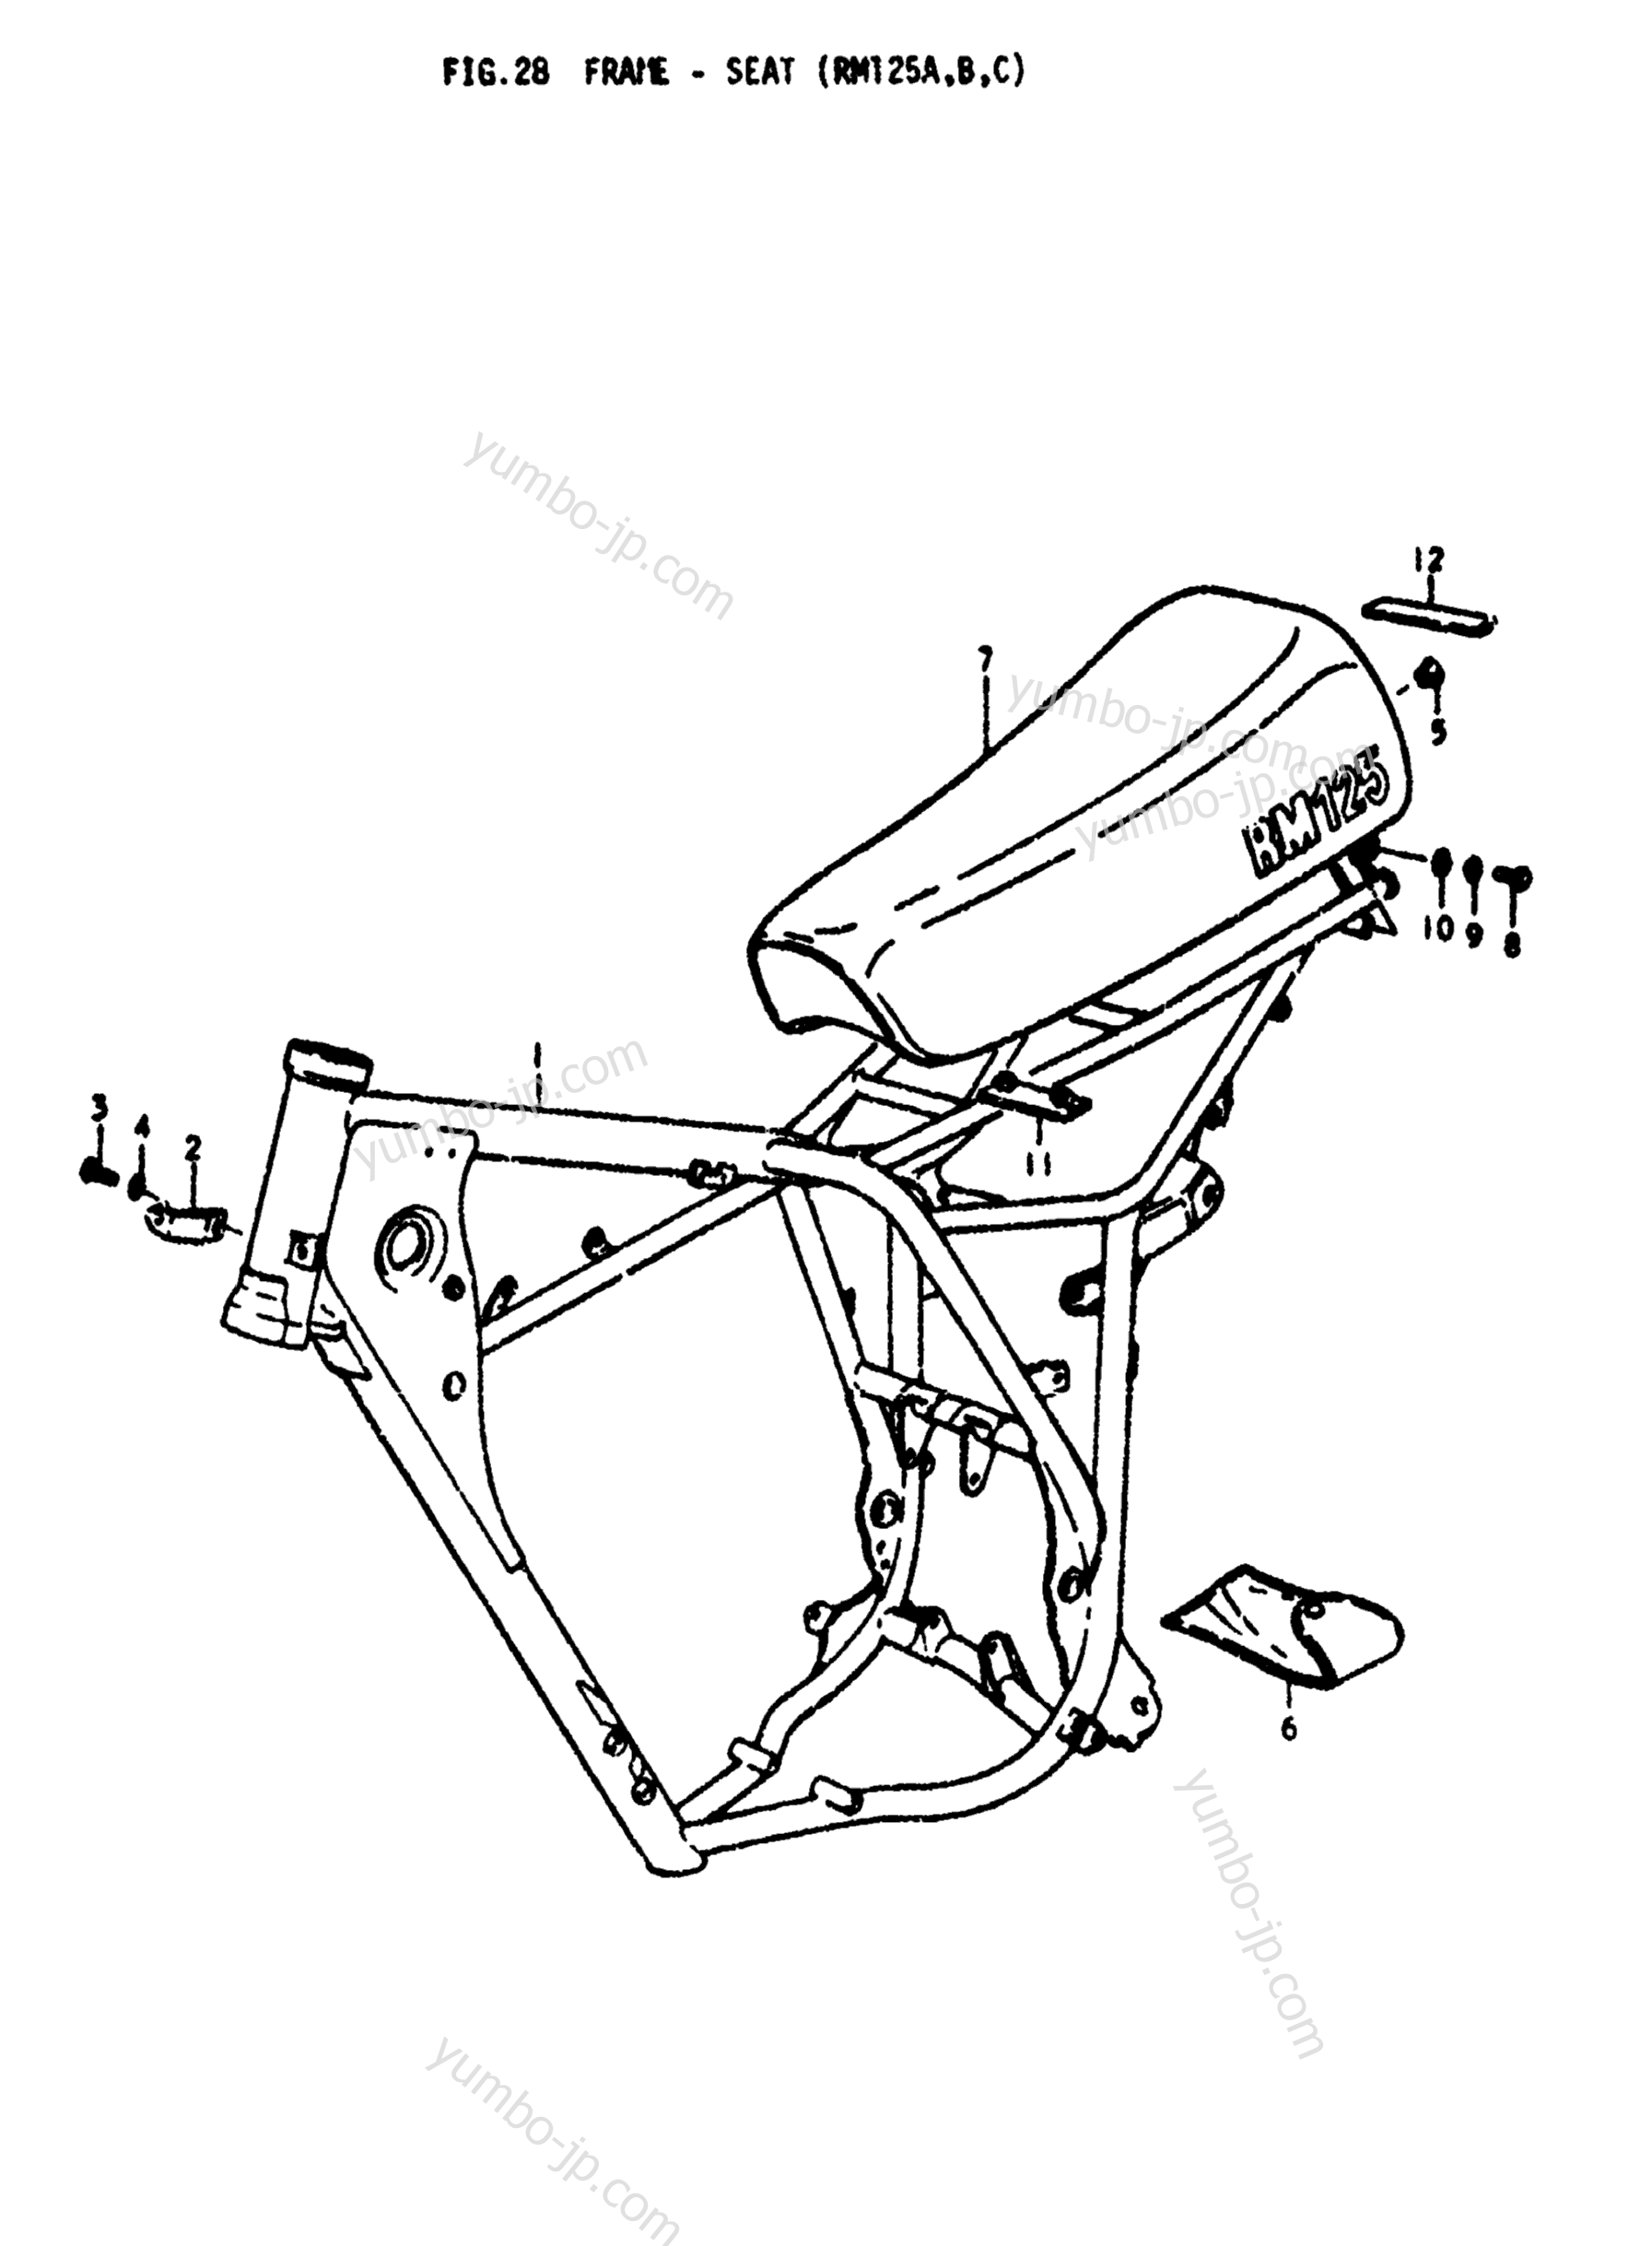 FRAME - SEAT (RM125A for motorcycles SUZUKI RM125 1978 year